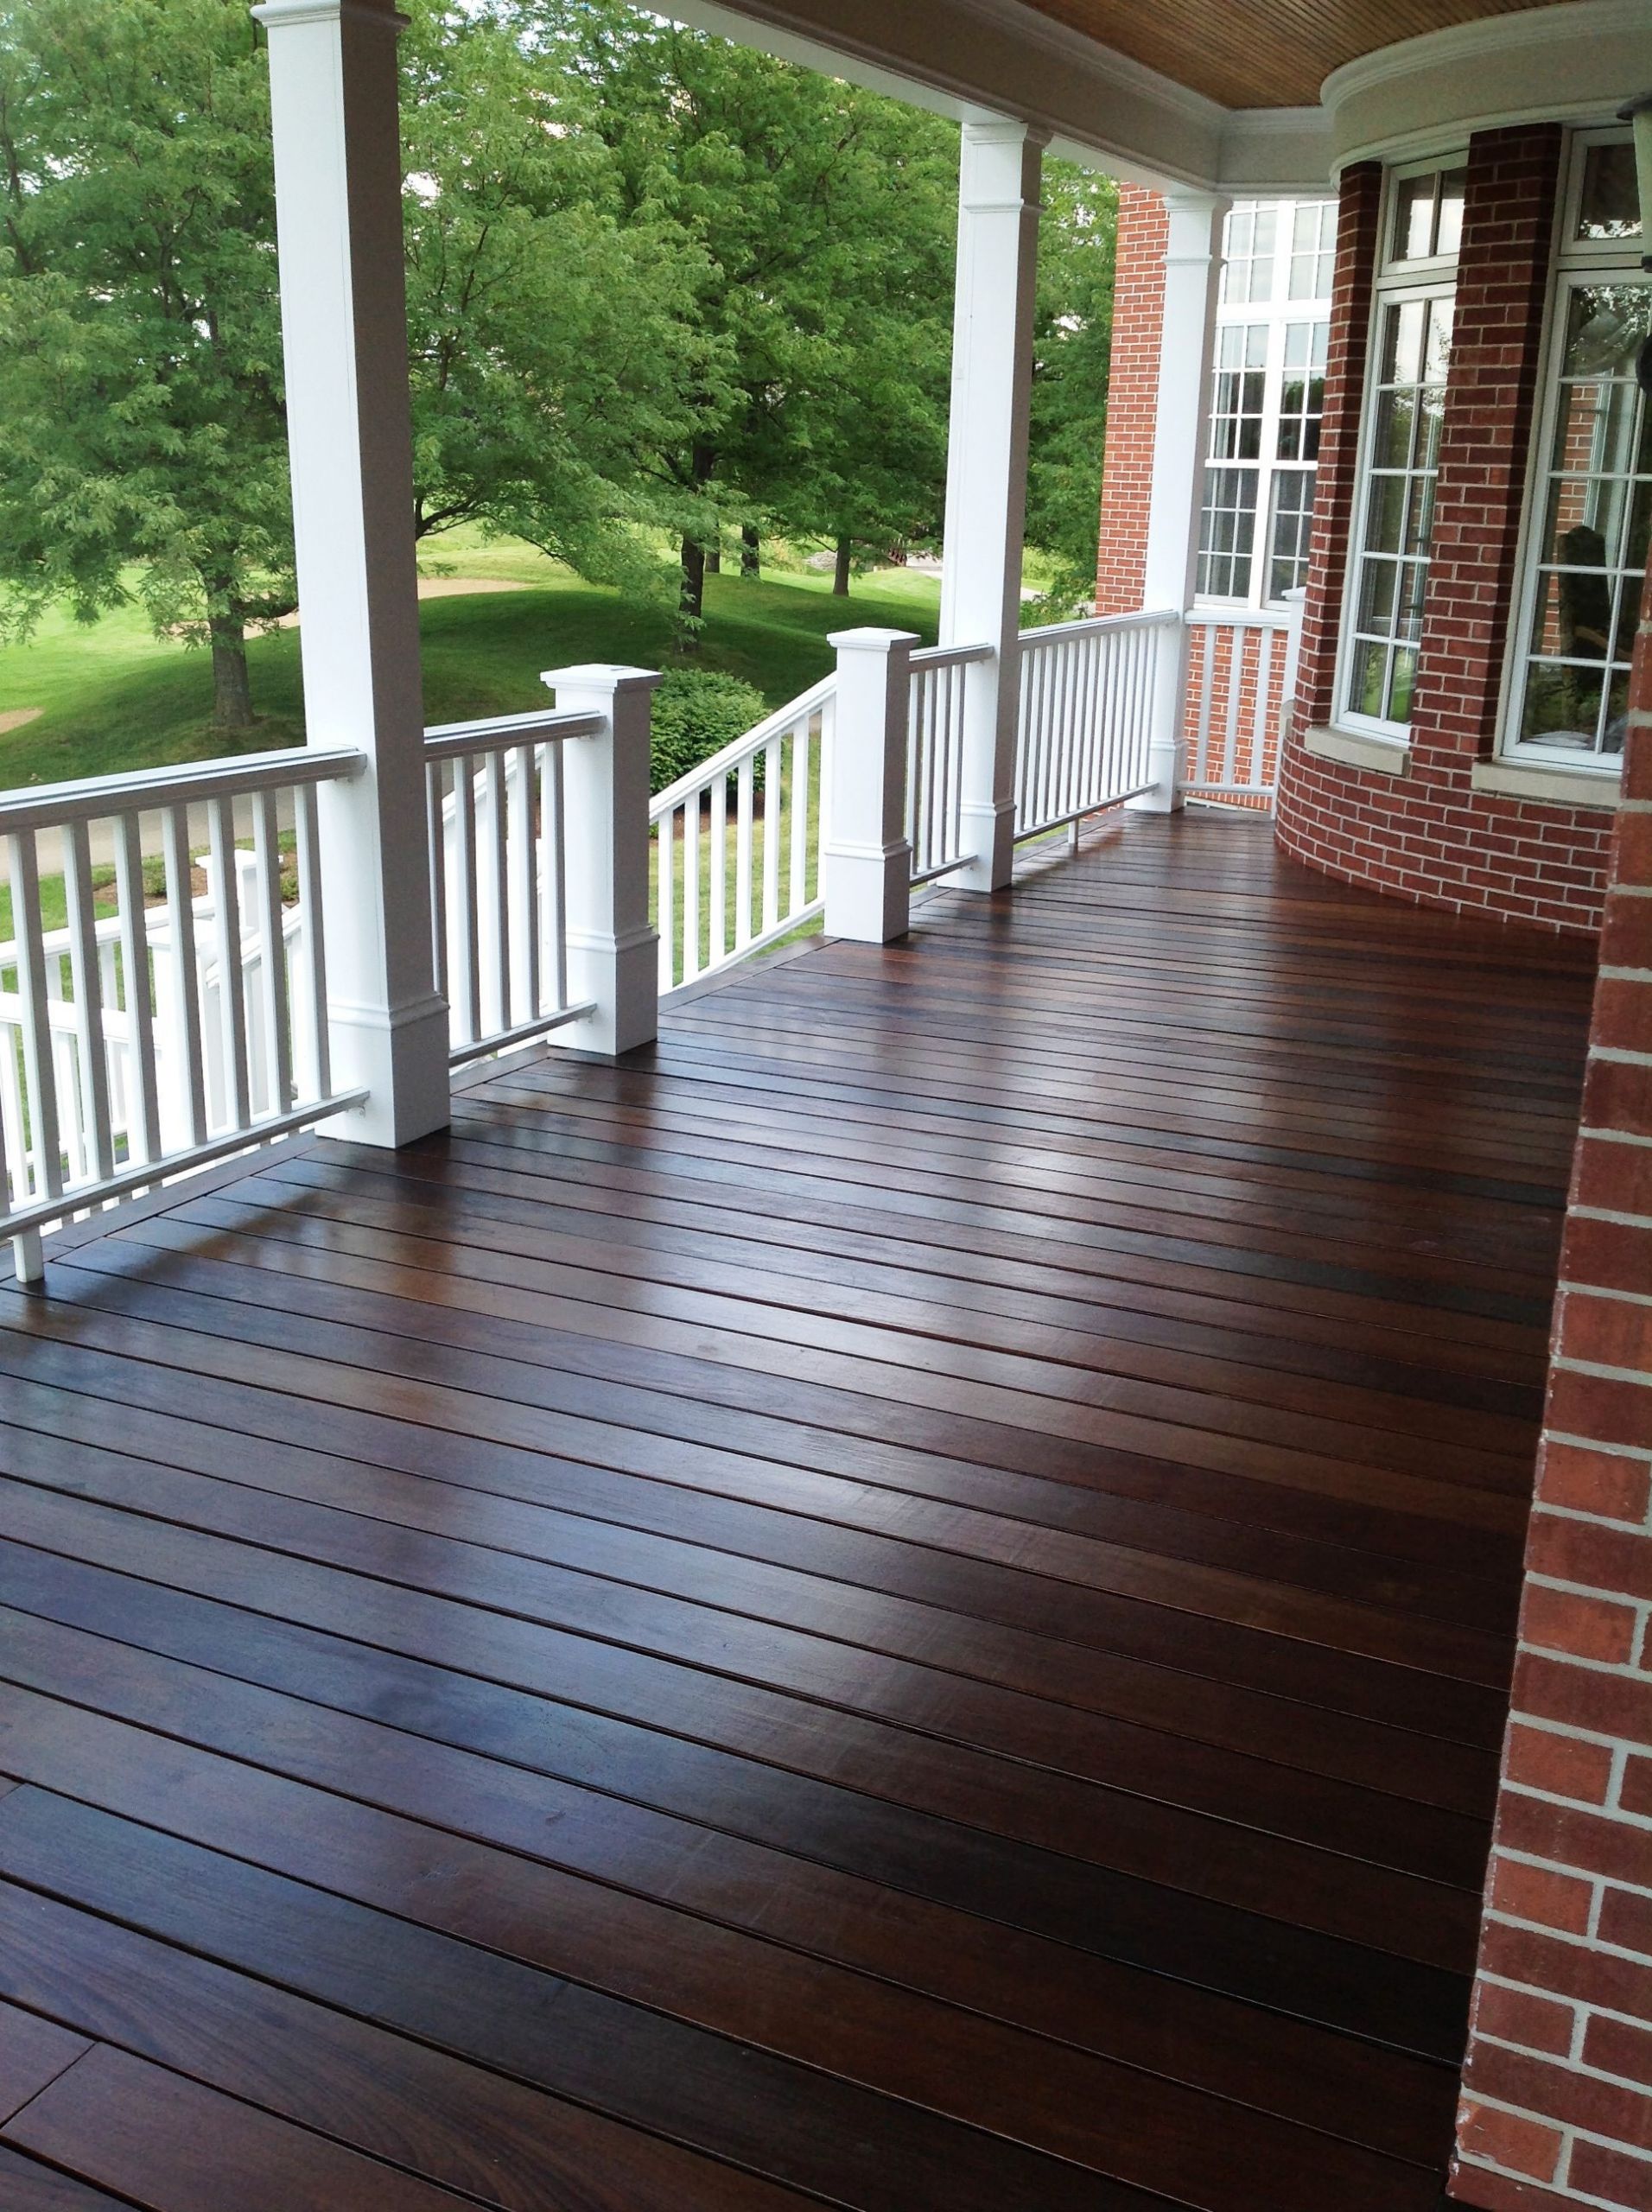 Painted Deck Ideas
 Factors to consider while choosing exterior paint colors